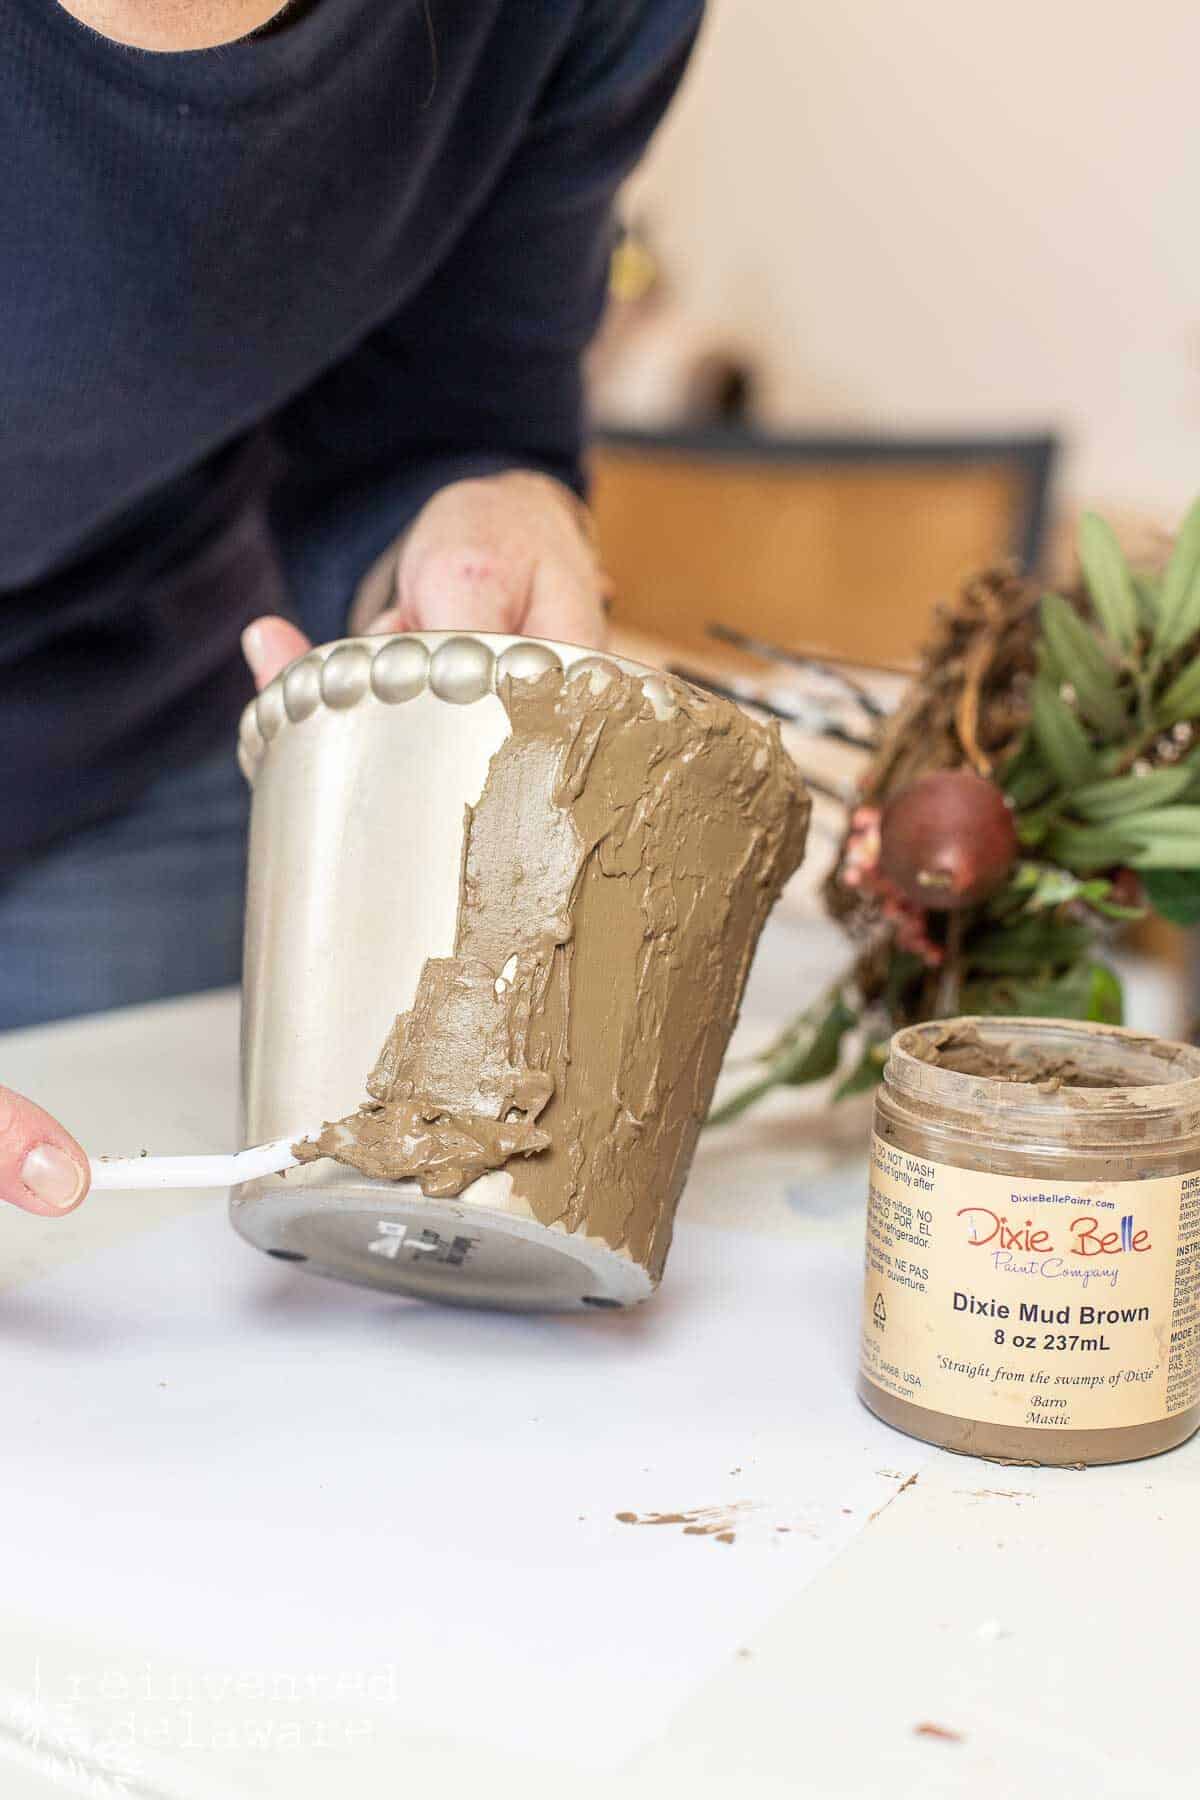 applying textured wood filler to pot to create a faux finish